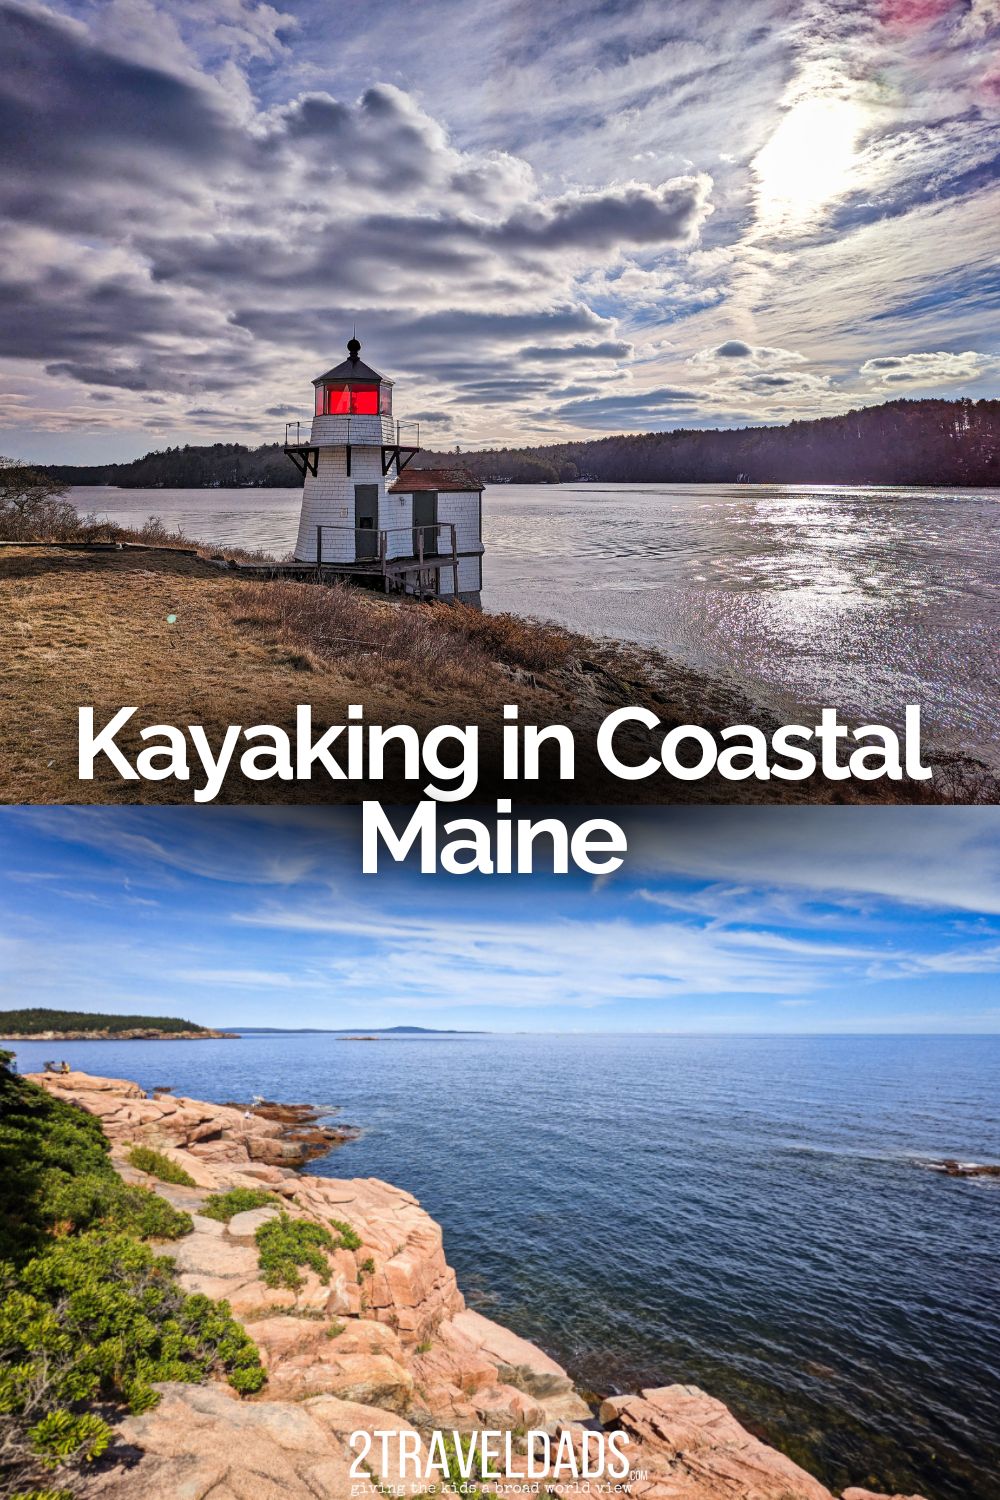 Kayaking in coastal Maine is the quintessential Northeast experience. From rocky coves and lobster pounds to kayaking at Acadia National Park, ideas and tips for awesome kayaking trips in Maine.